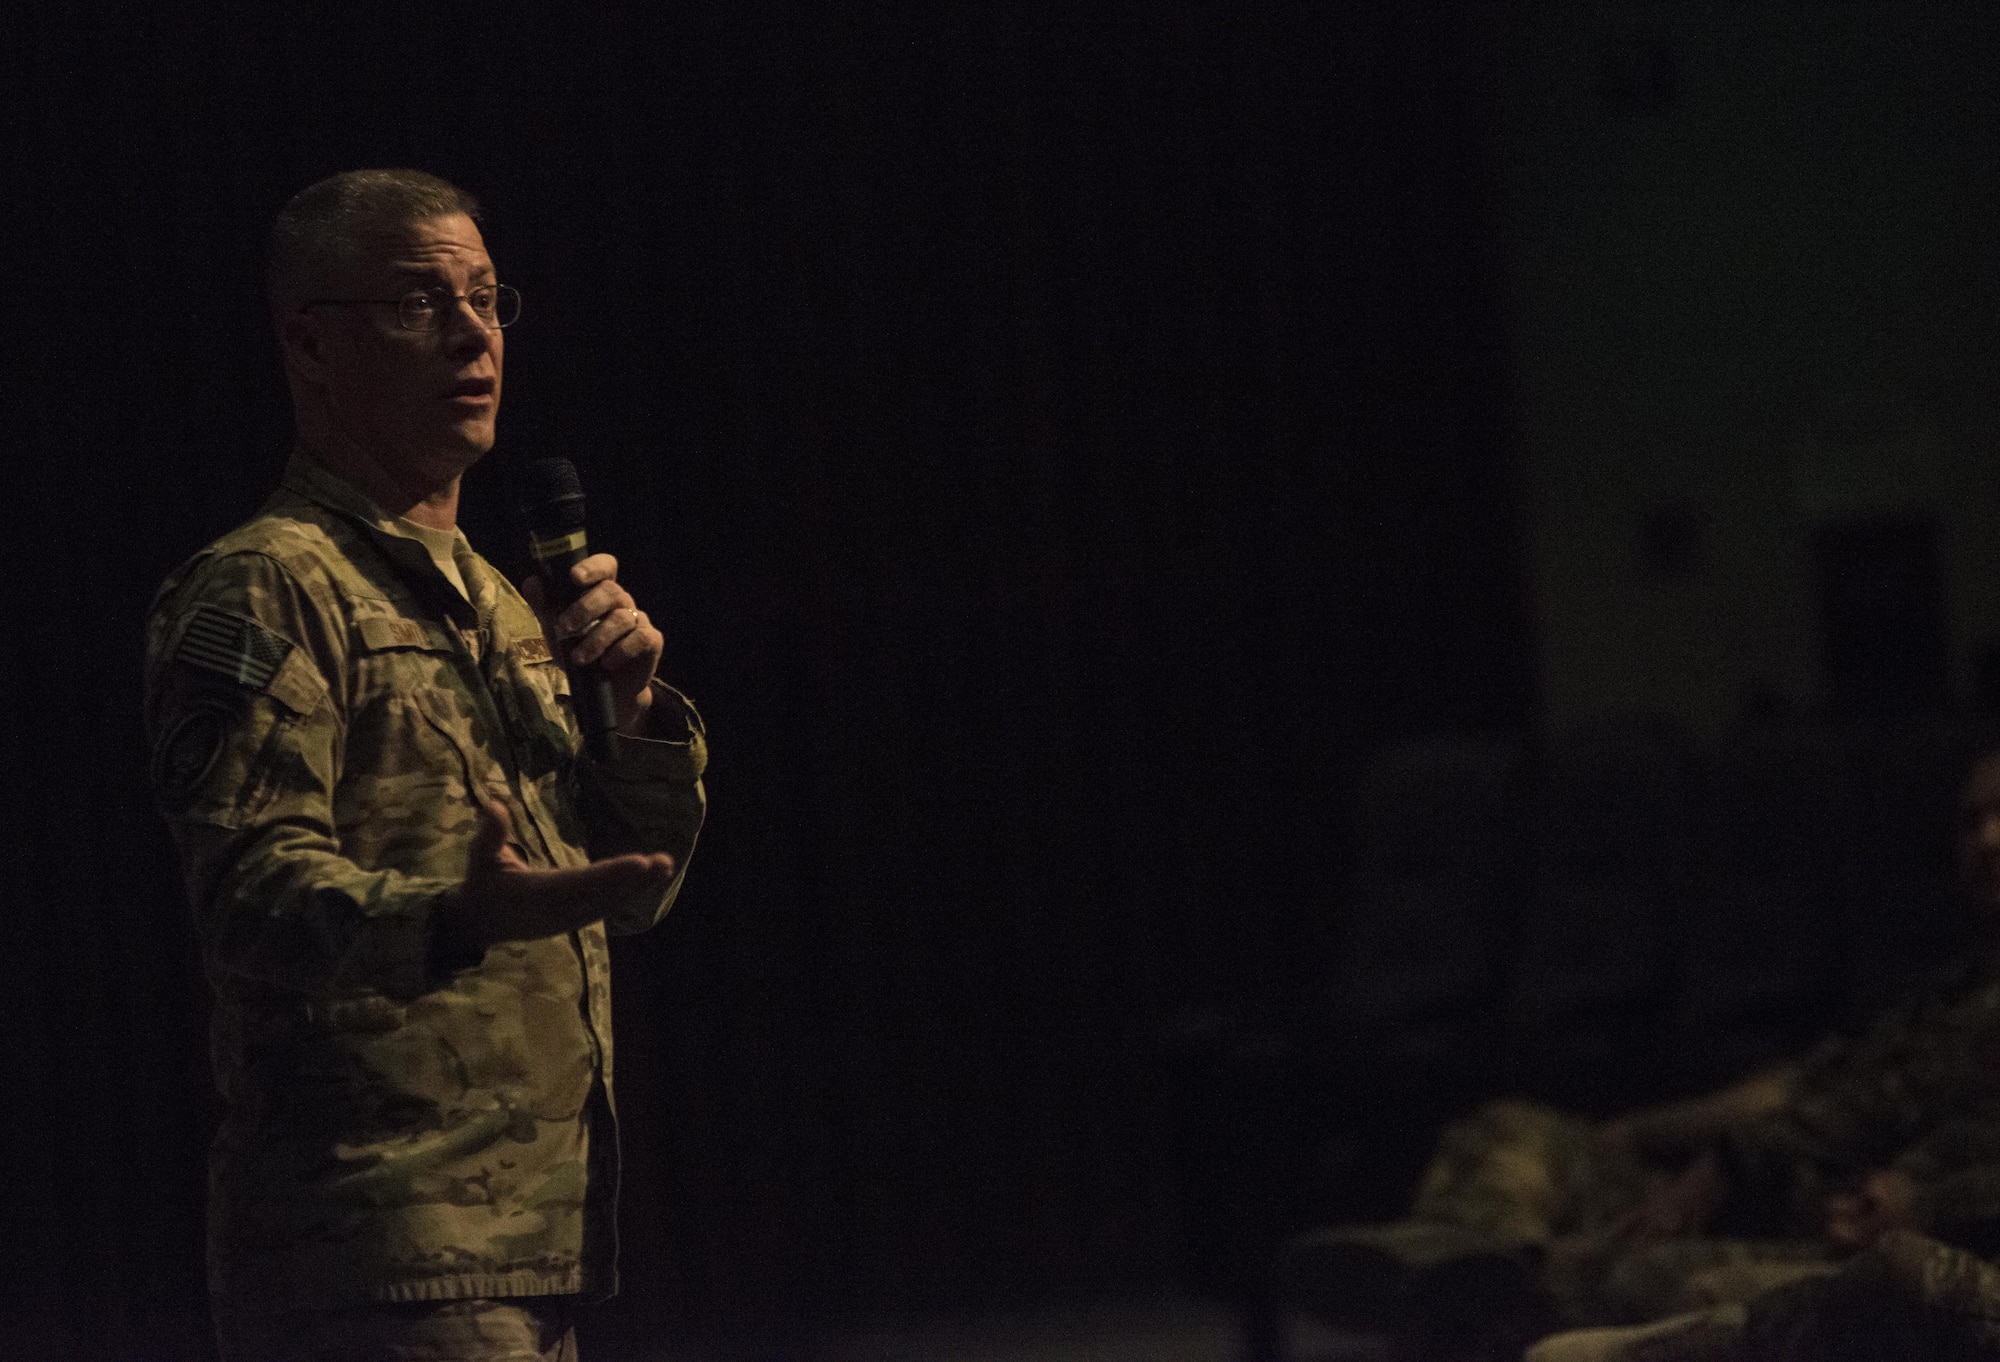 Air Force Special Operations Command Chief Master Sgt. Gregory Smith addresses the enlisted members of the 353rd Special Operations Group during an all-call June 19, 2017 at Kadena Air Base, Okinawa, Japan. Smith took the opportunity to address Airmen on changes to developmental special duties, enlisted performance evaluations, enlisted professional military education and the blended retirement system. (U.S. Air Force photo by Capt. Jessica Tait)